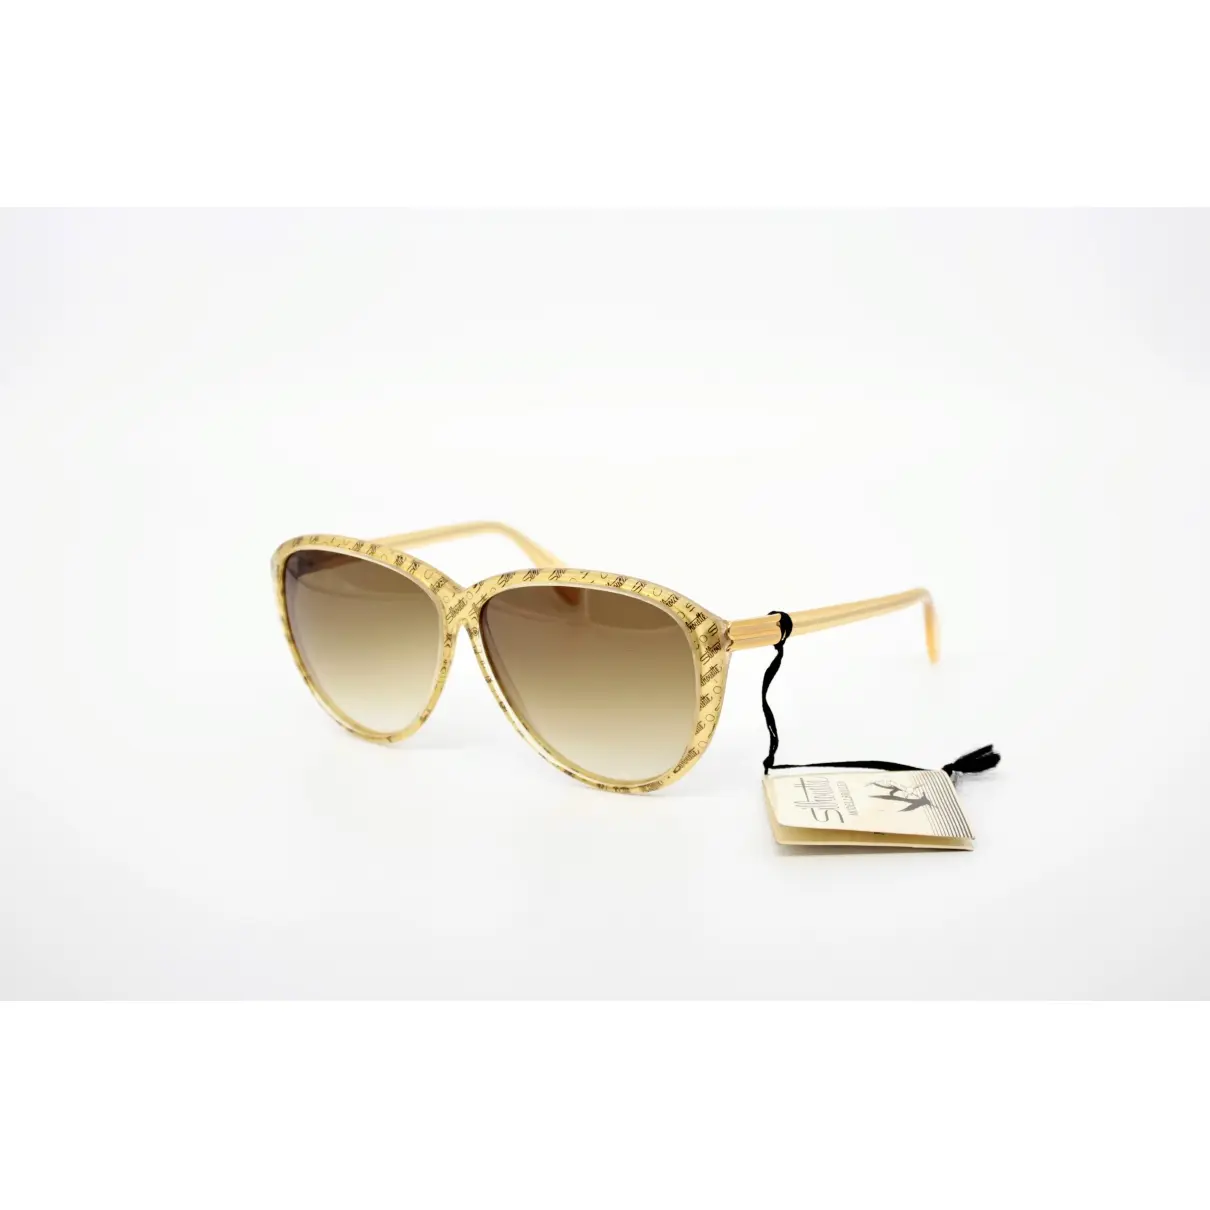 Silhouette Oversized sunglasses for sale - Vintage